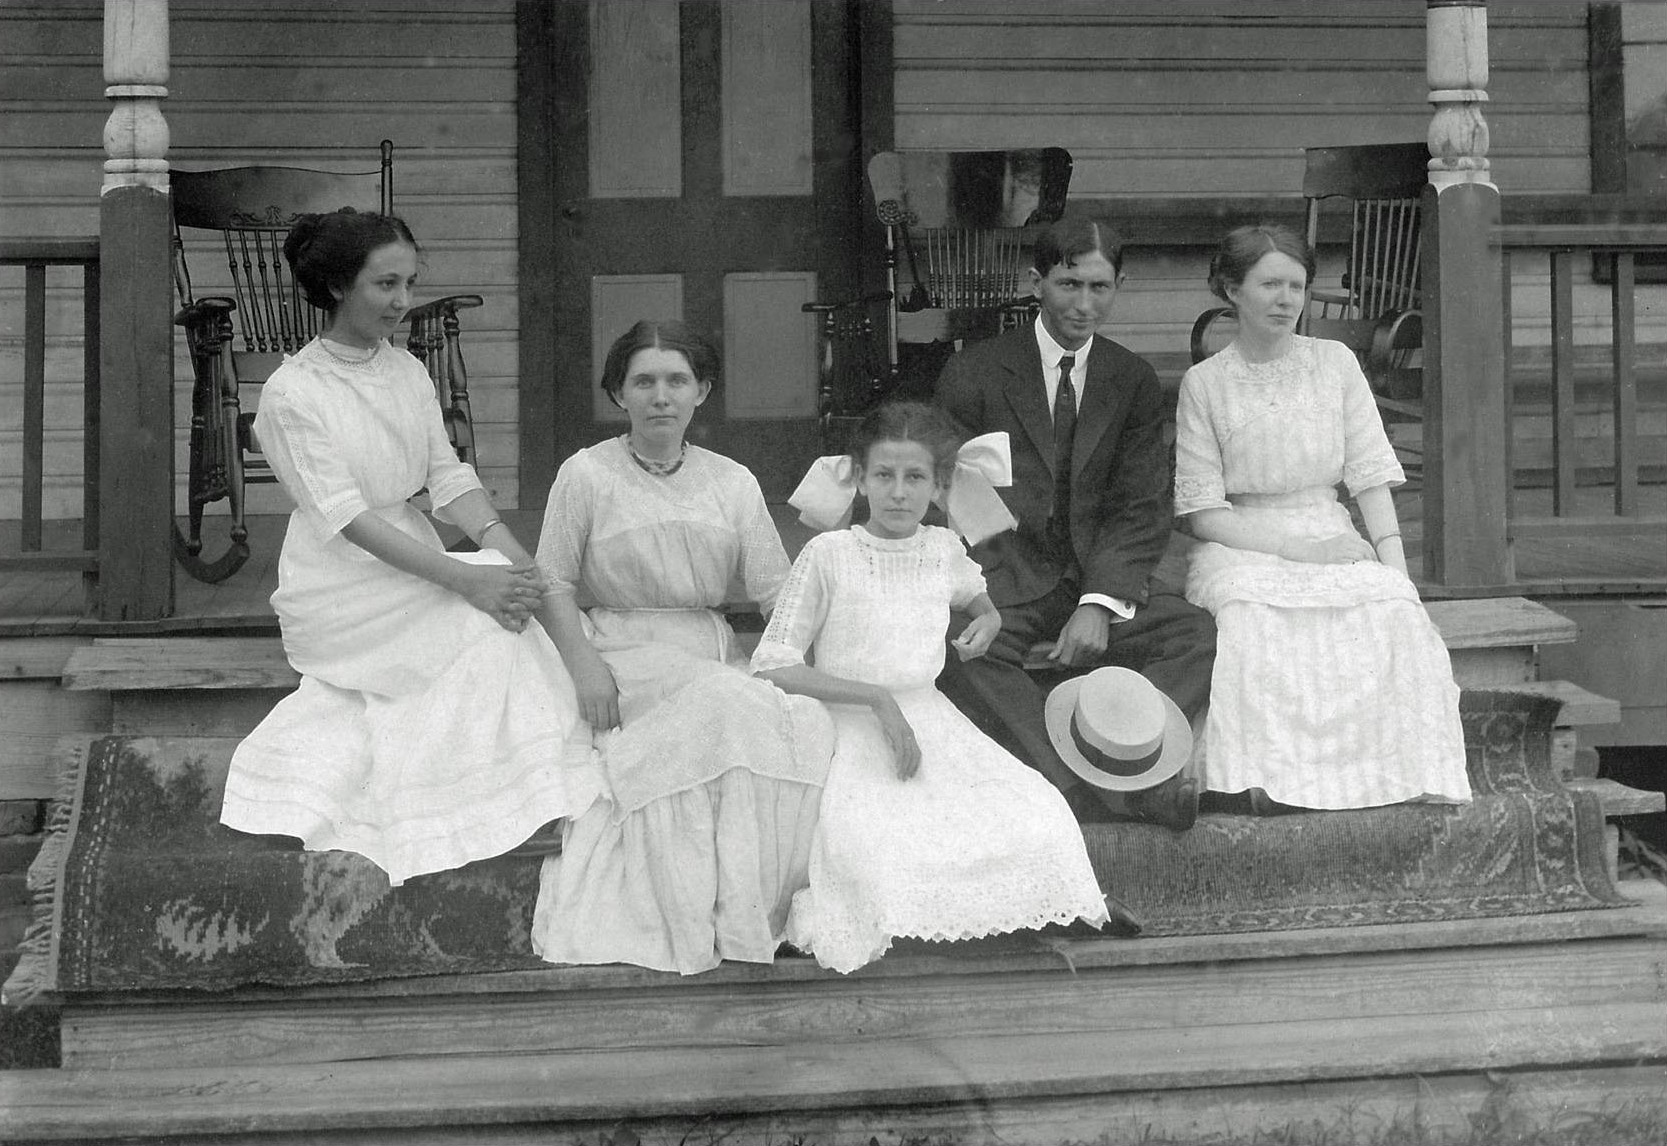 Another photo from the early 1900s of my great-aunts Mary Speer (second from left) and Irene Speer (on the right) along with friends Irene, Elva and Raphael Pourcoai, probably on the front porch of their house in Rankin County, Mississippi. View full size.